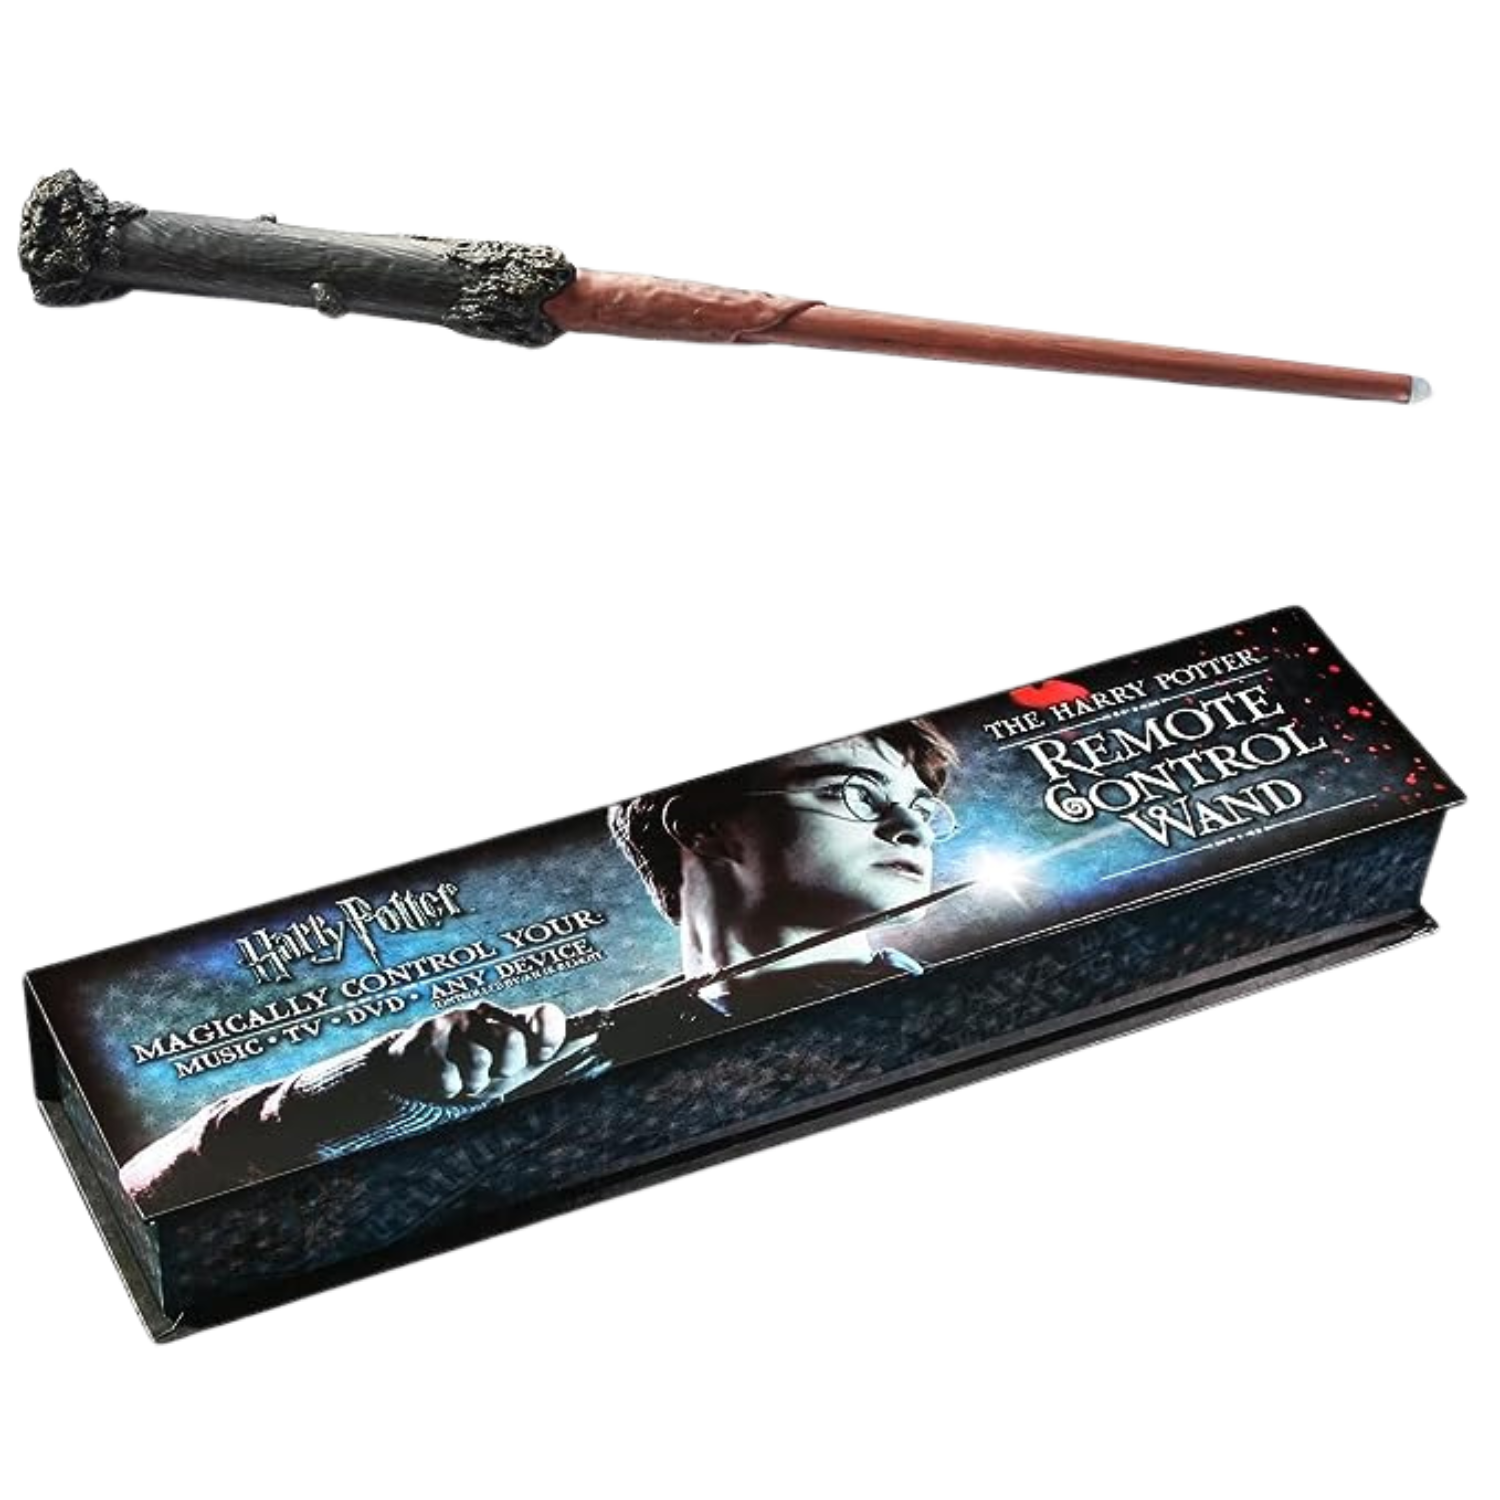 This image shows the Harry Potter Remote Control Wand next to its box